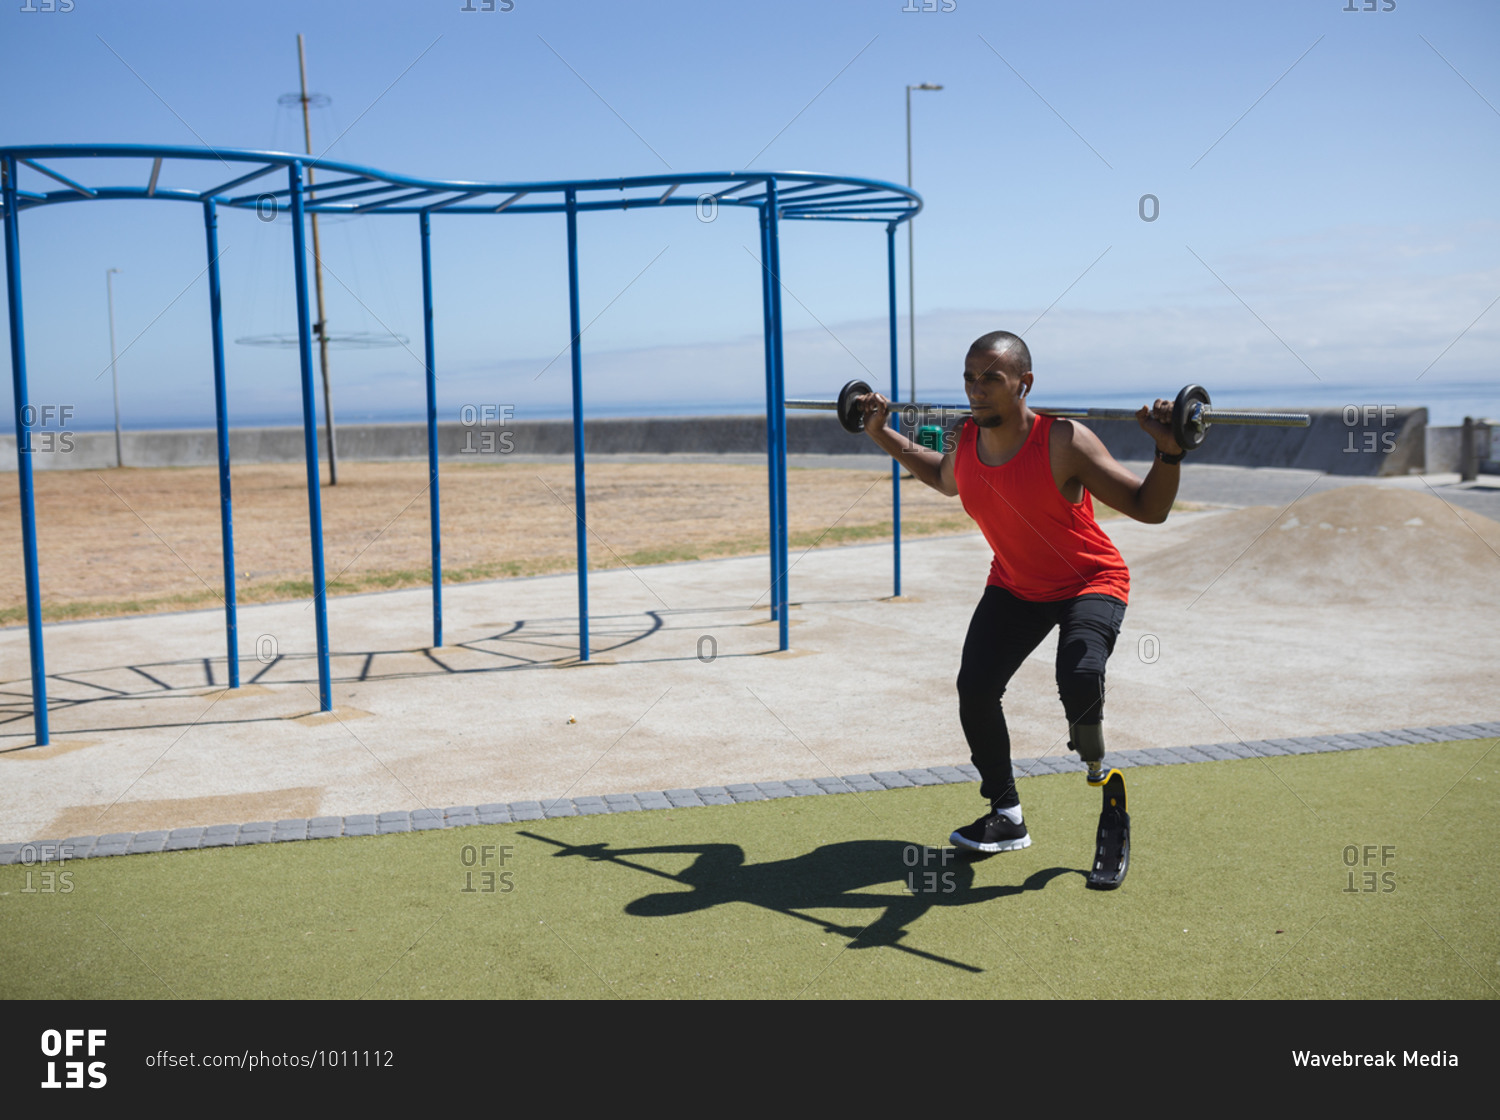 Disabled mixed race man with a prosthetic leg and running blade working out at an outdoor gym by the coast, lifting weights on a barbell. Fitness disability healthy lifestyle.